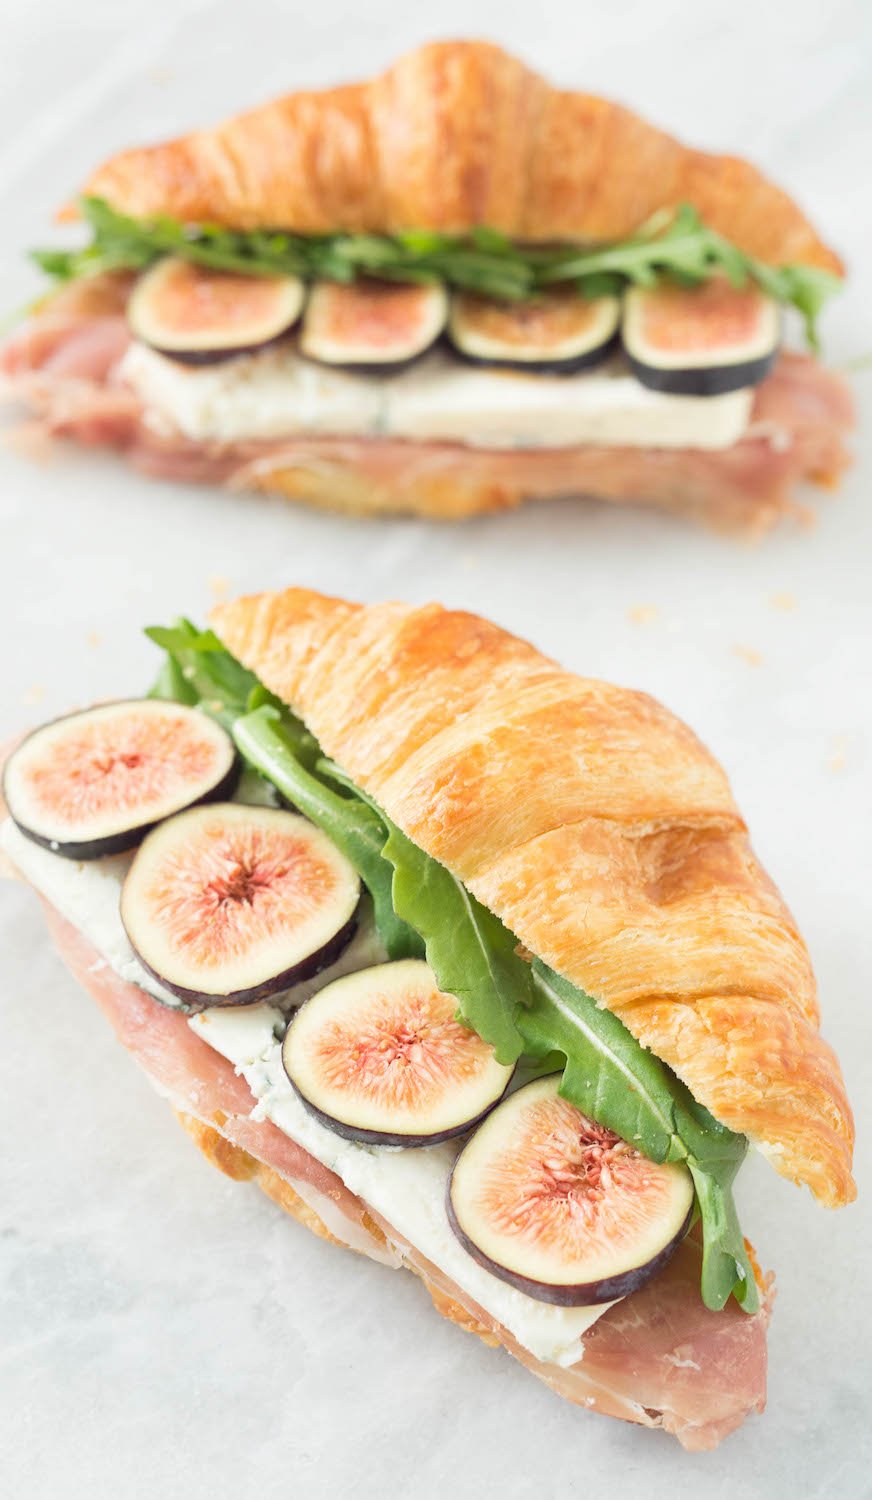 Two fig and blue cheese sandwiches sit on a white background. The croissant tops are positioned slightly off to the side so you can see the layers of prosciutto, blue cheese, sliced figs, and arugula. 